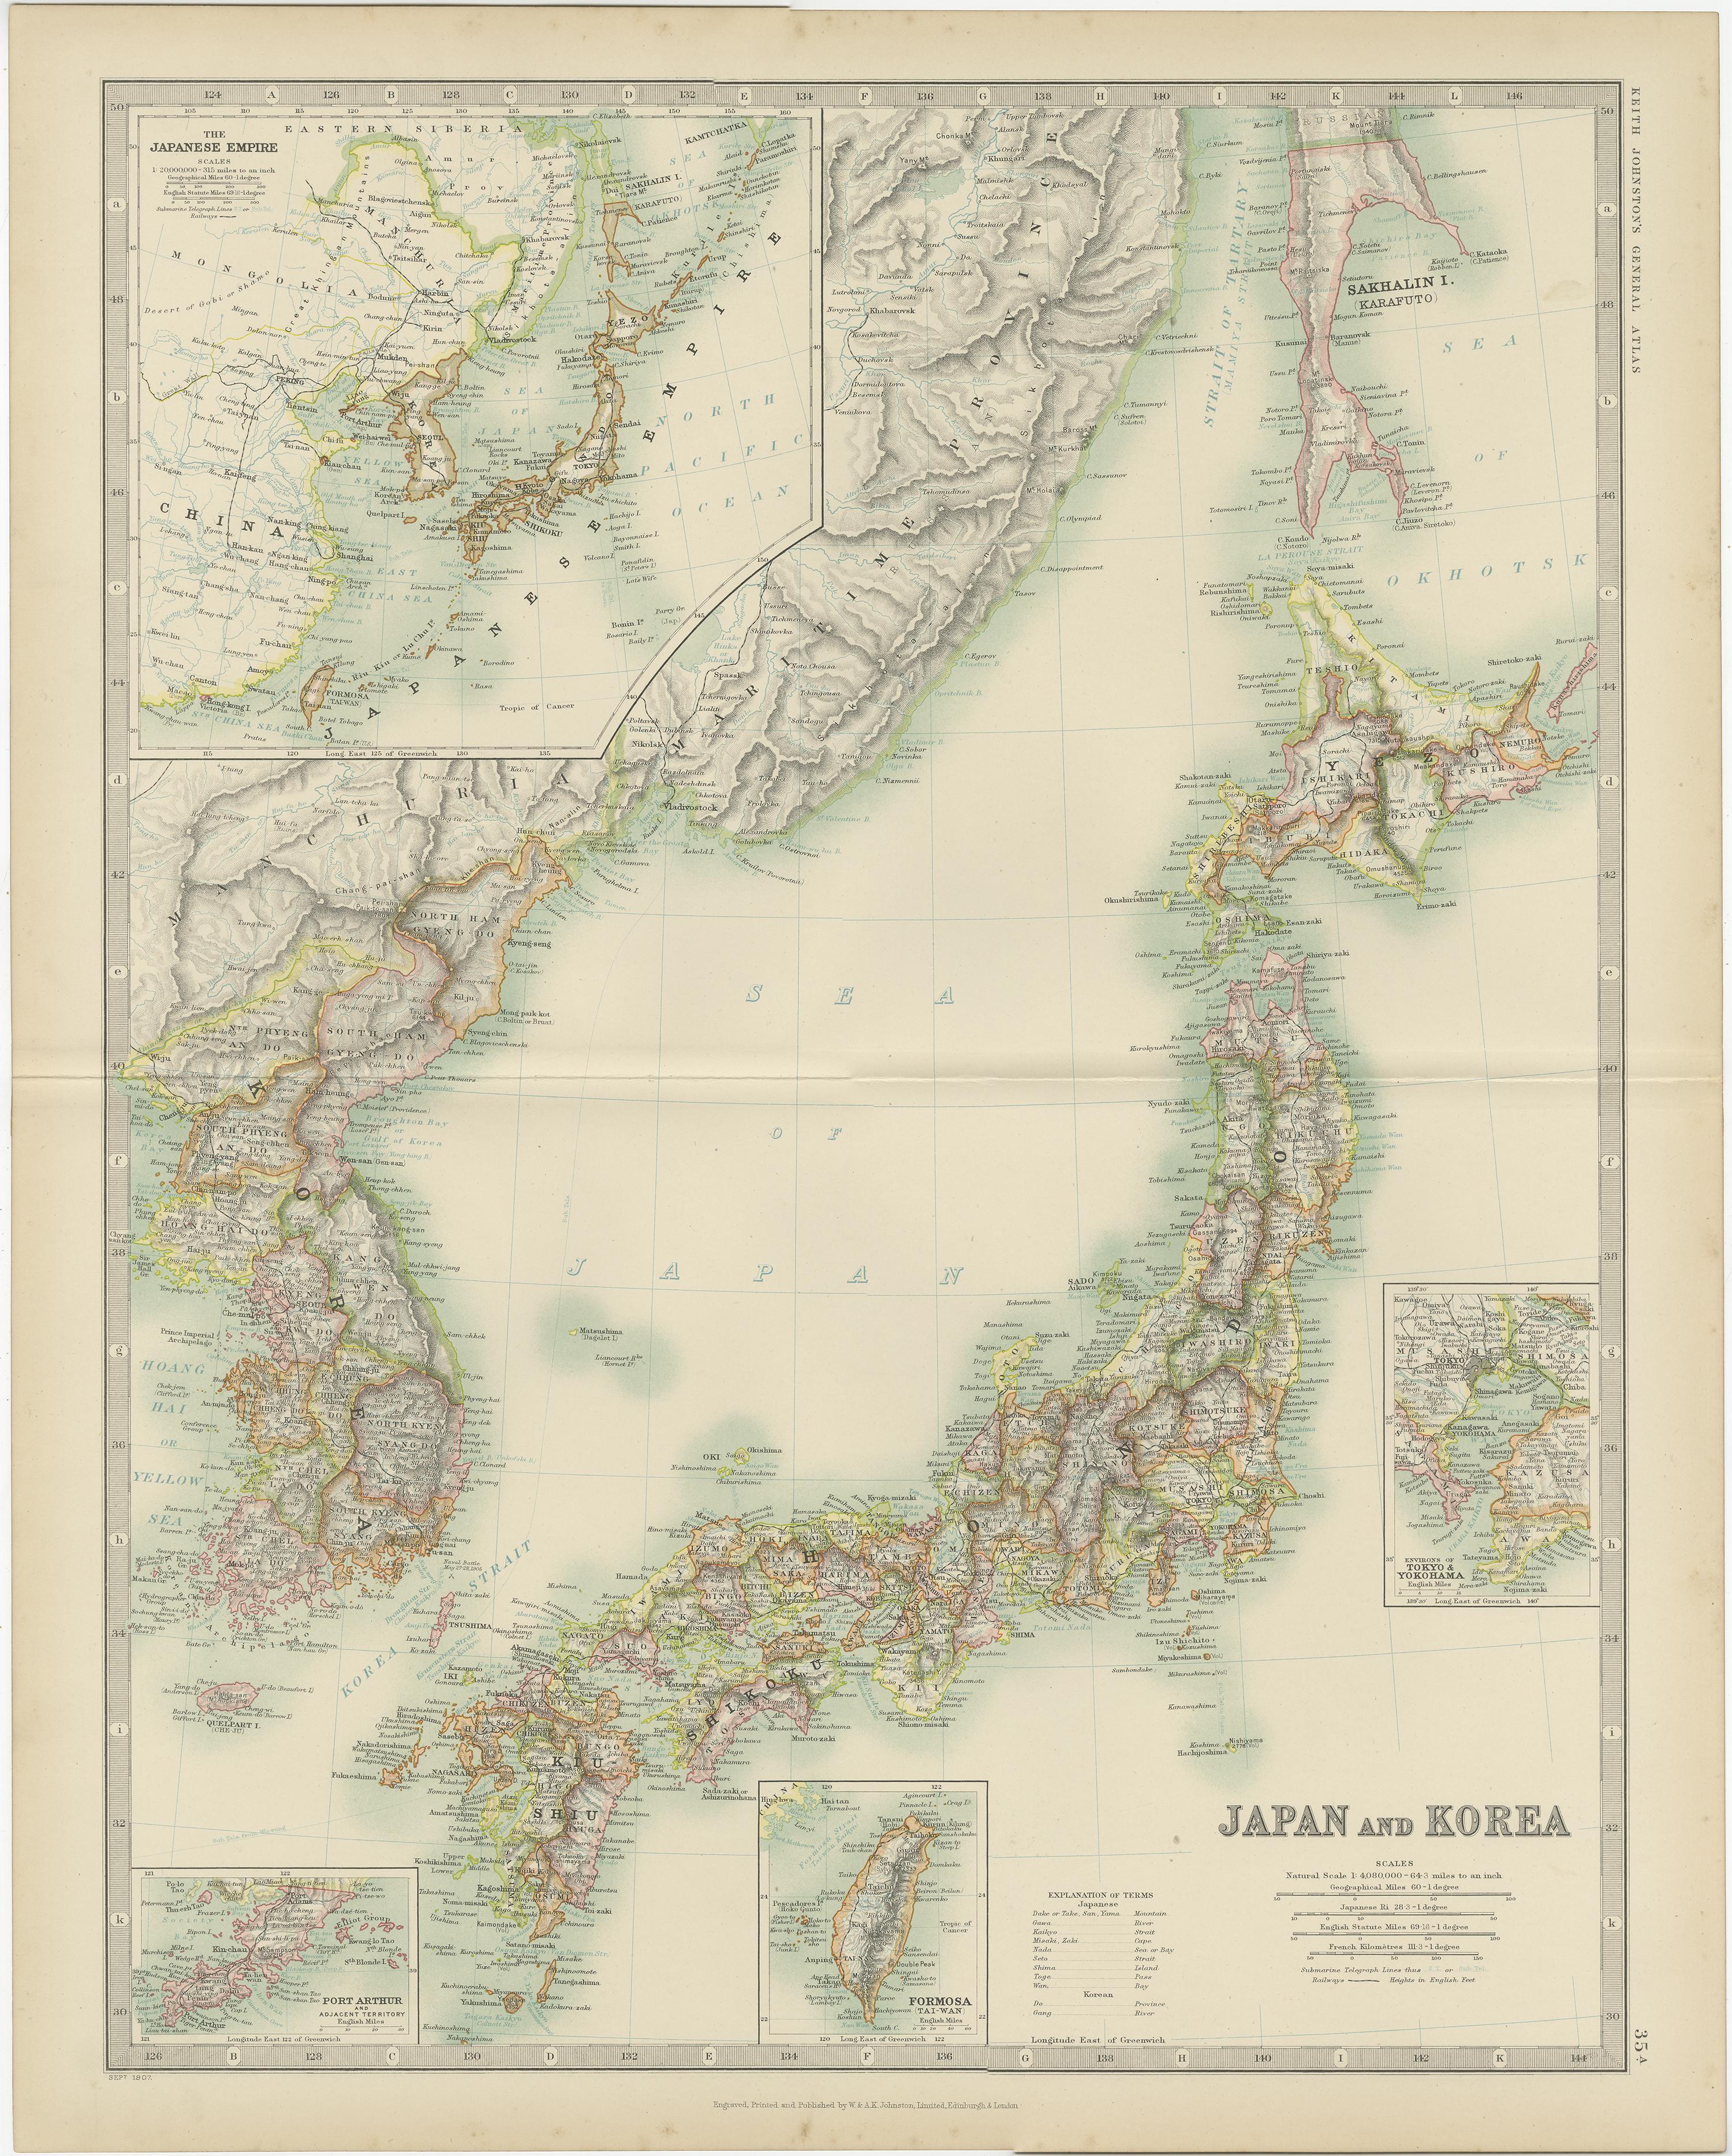 Antique map titled 'Japan and Korea'. Original antique map of Japan and Korea. With inset maps of the Japanese Empire, Port Arthur, Formosa ,Tokyo and Yokohama. This map originates from the ‘Royal Atlas of Modern Geography’. Published by W. & A.K.